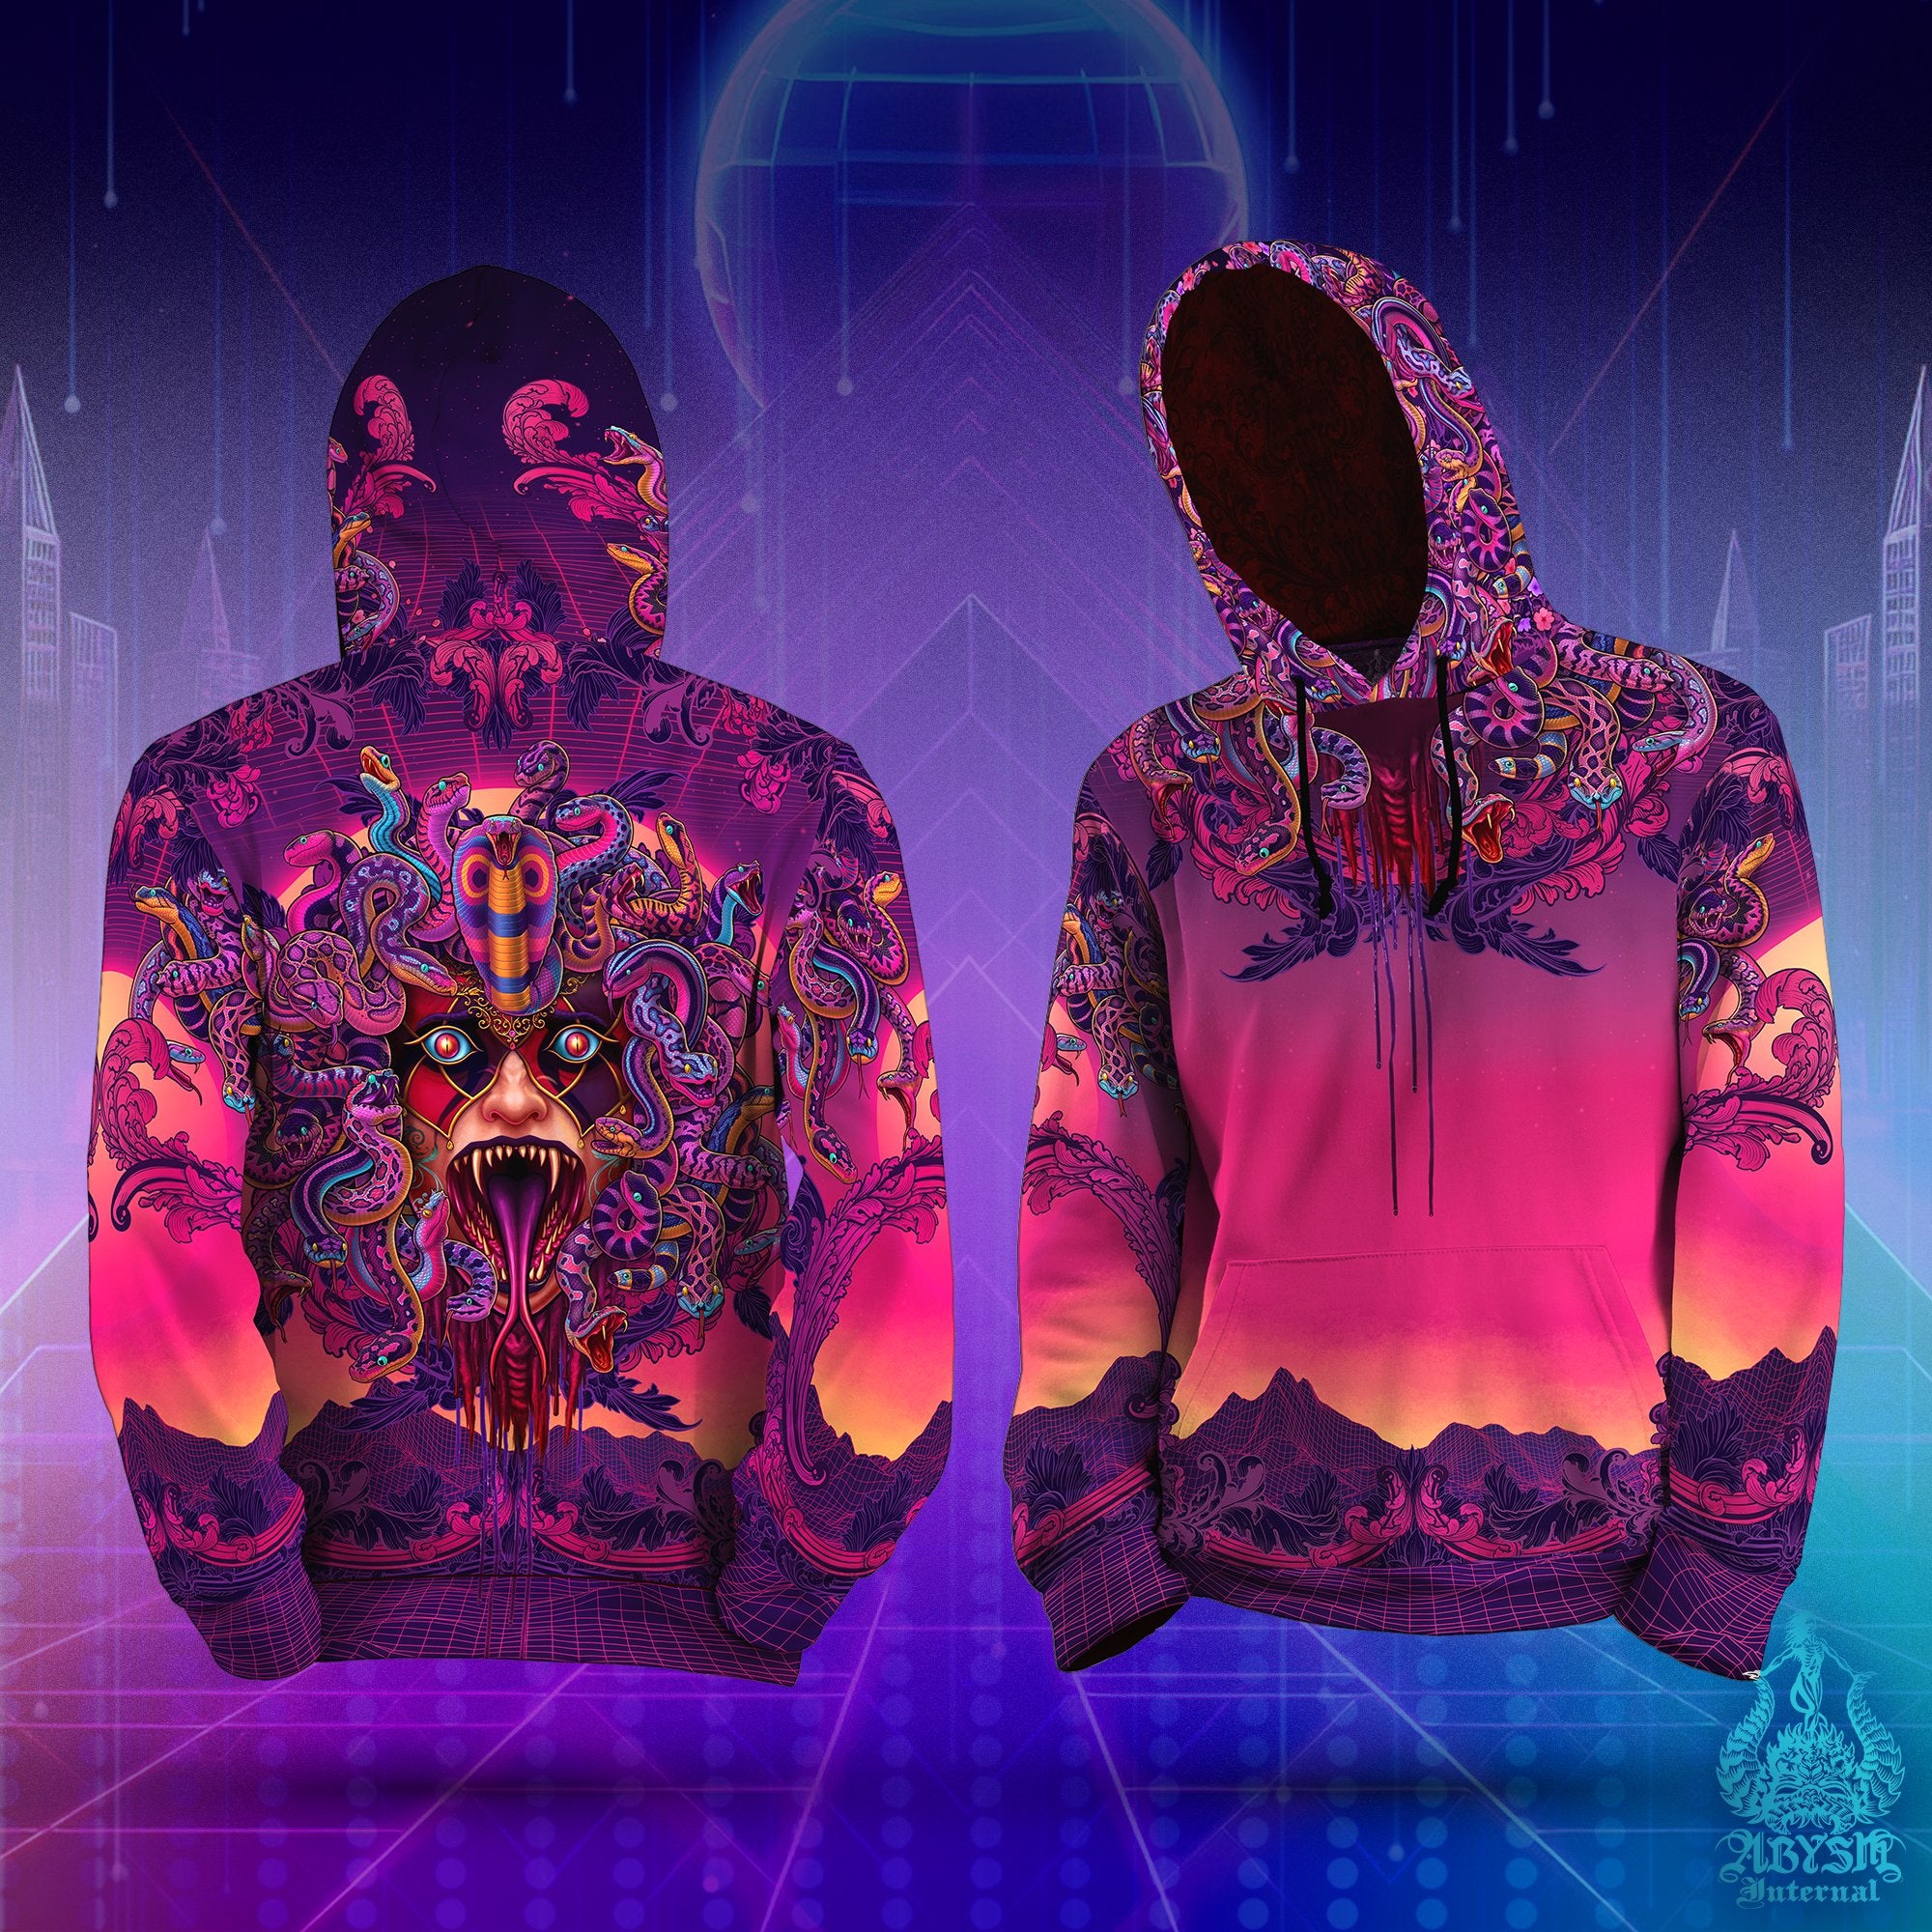 Psychedelic Skull Hoodie, Vaporwave Outfit, Colorful Pullover, Trippy Streetwear, Synthwave Festival, Gamer 80s Sweater, Unisex - Retrowave Medusa, 2 Faces - Abysm Internal